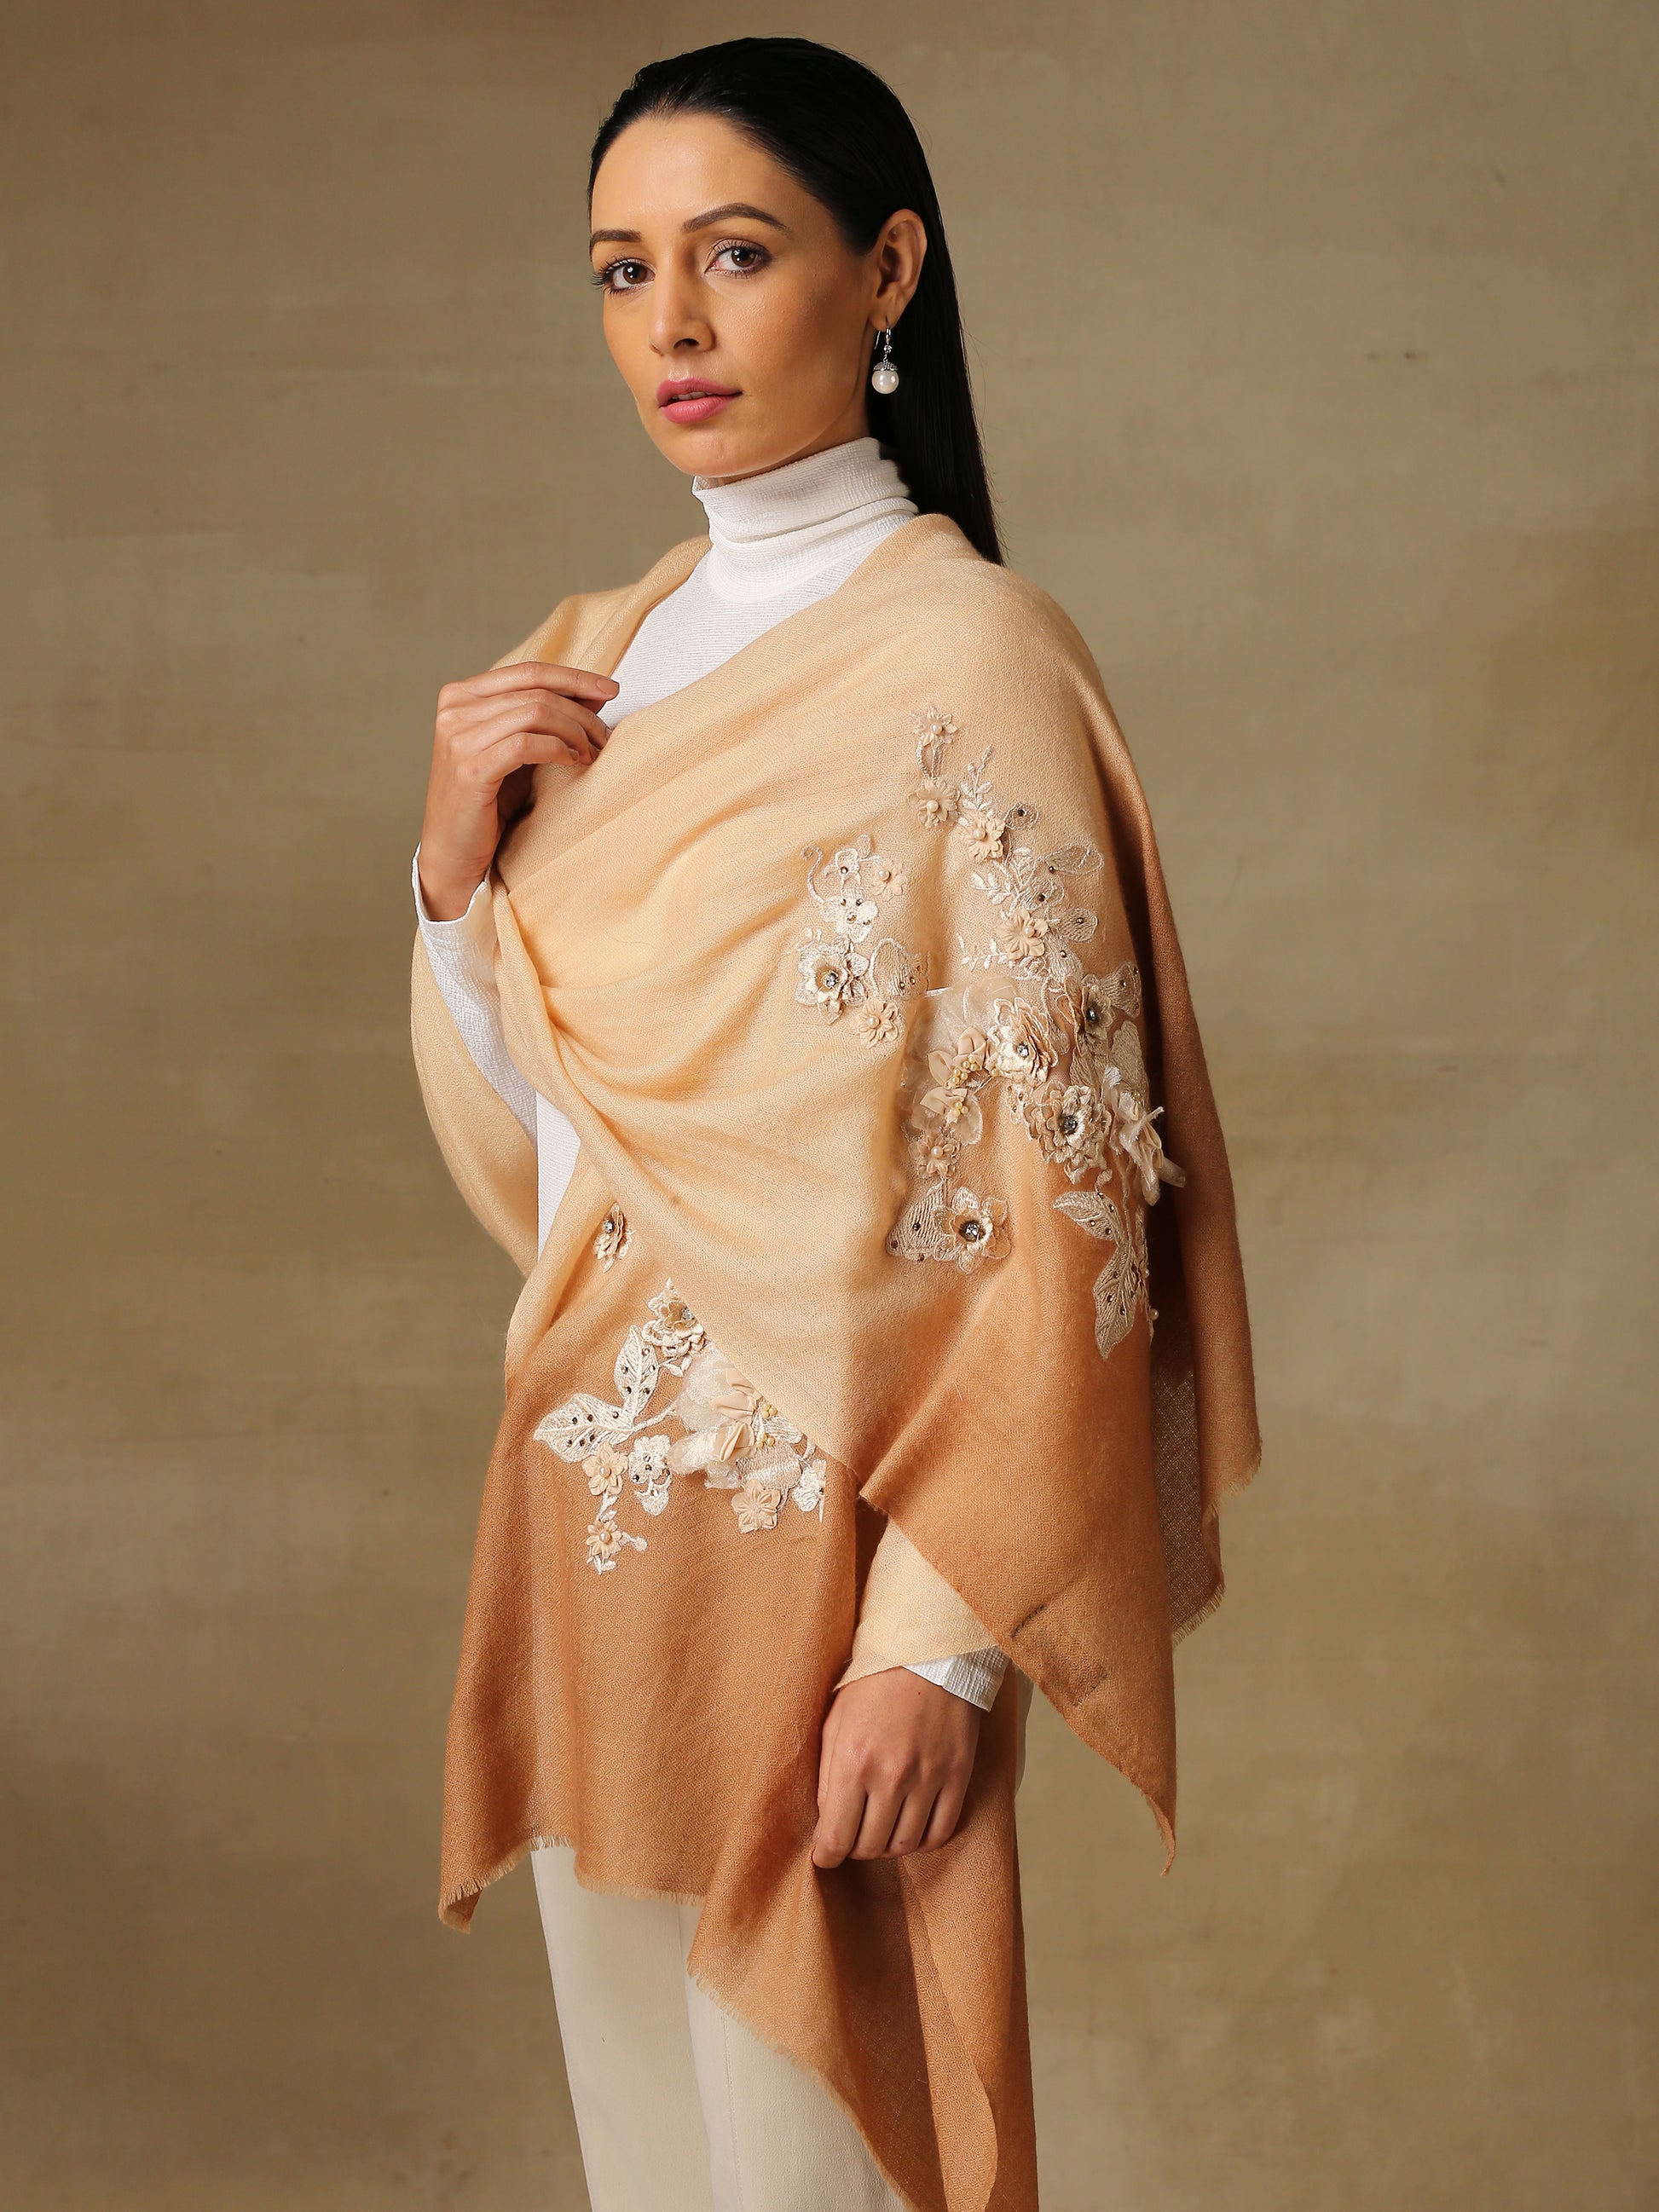 Model is wearing a pashmina stole in an ombre of nude and brown is lavishly embellished with floral motifs, made with threadwork, swarovski, pearls, and applique. This stole is from the Elements of spring collection.  